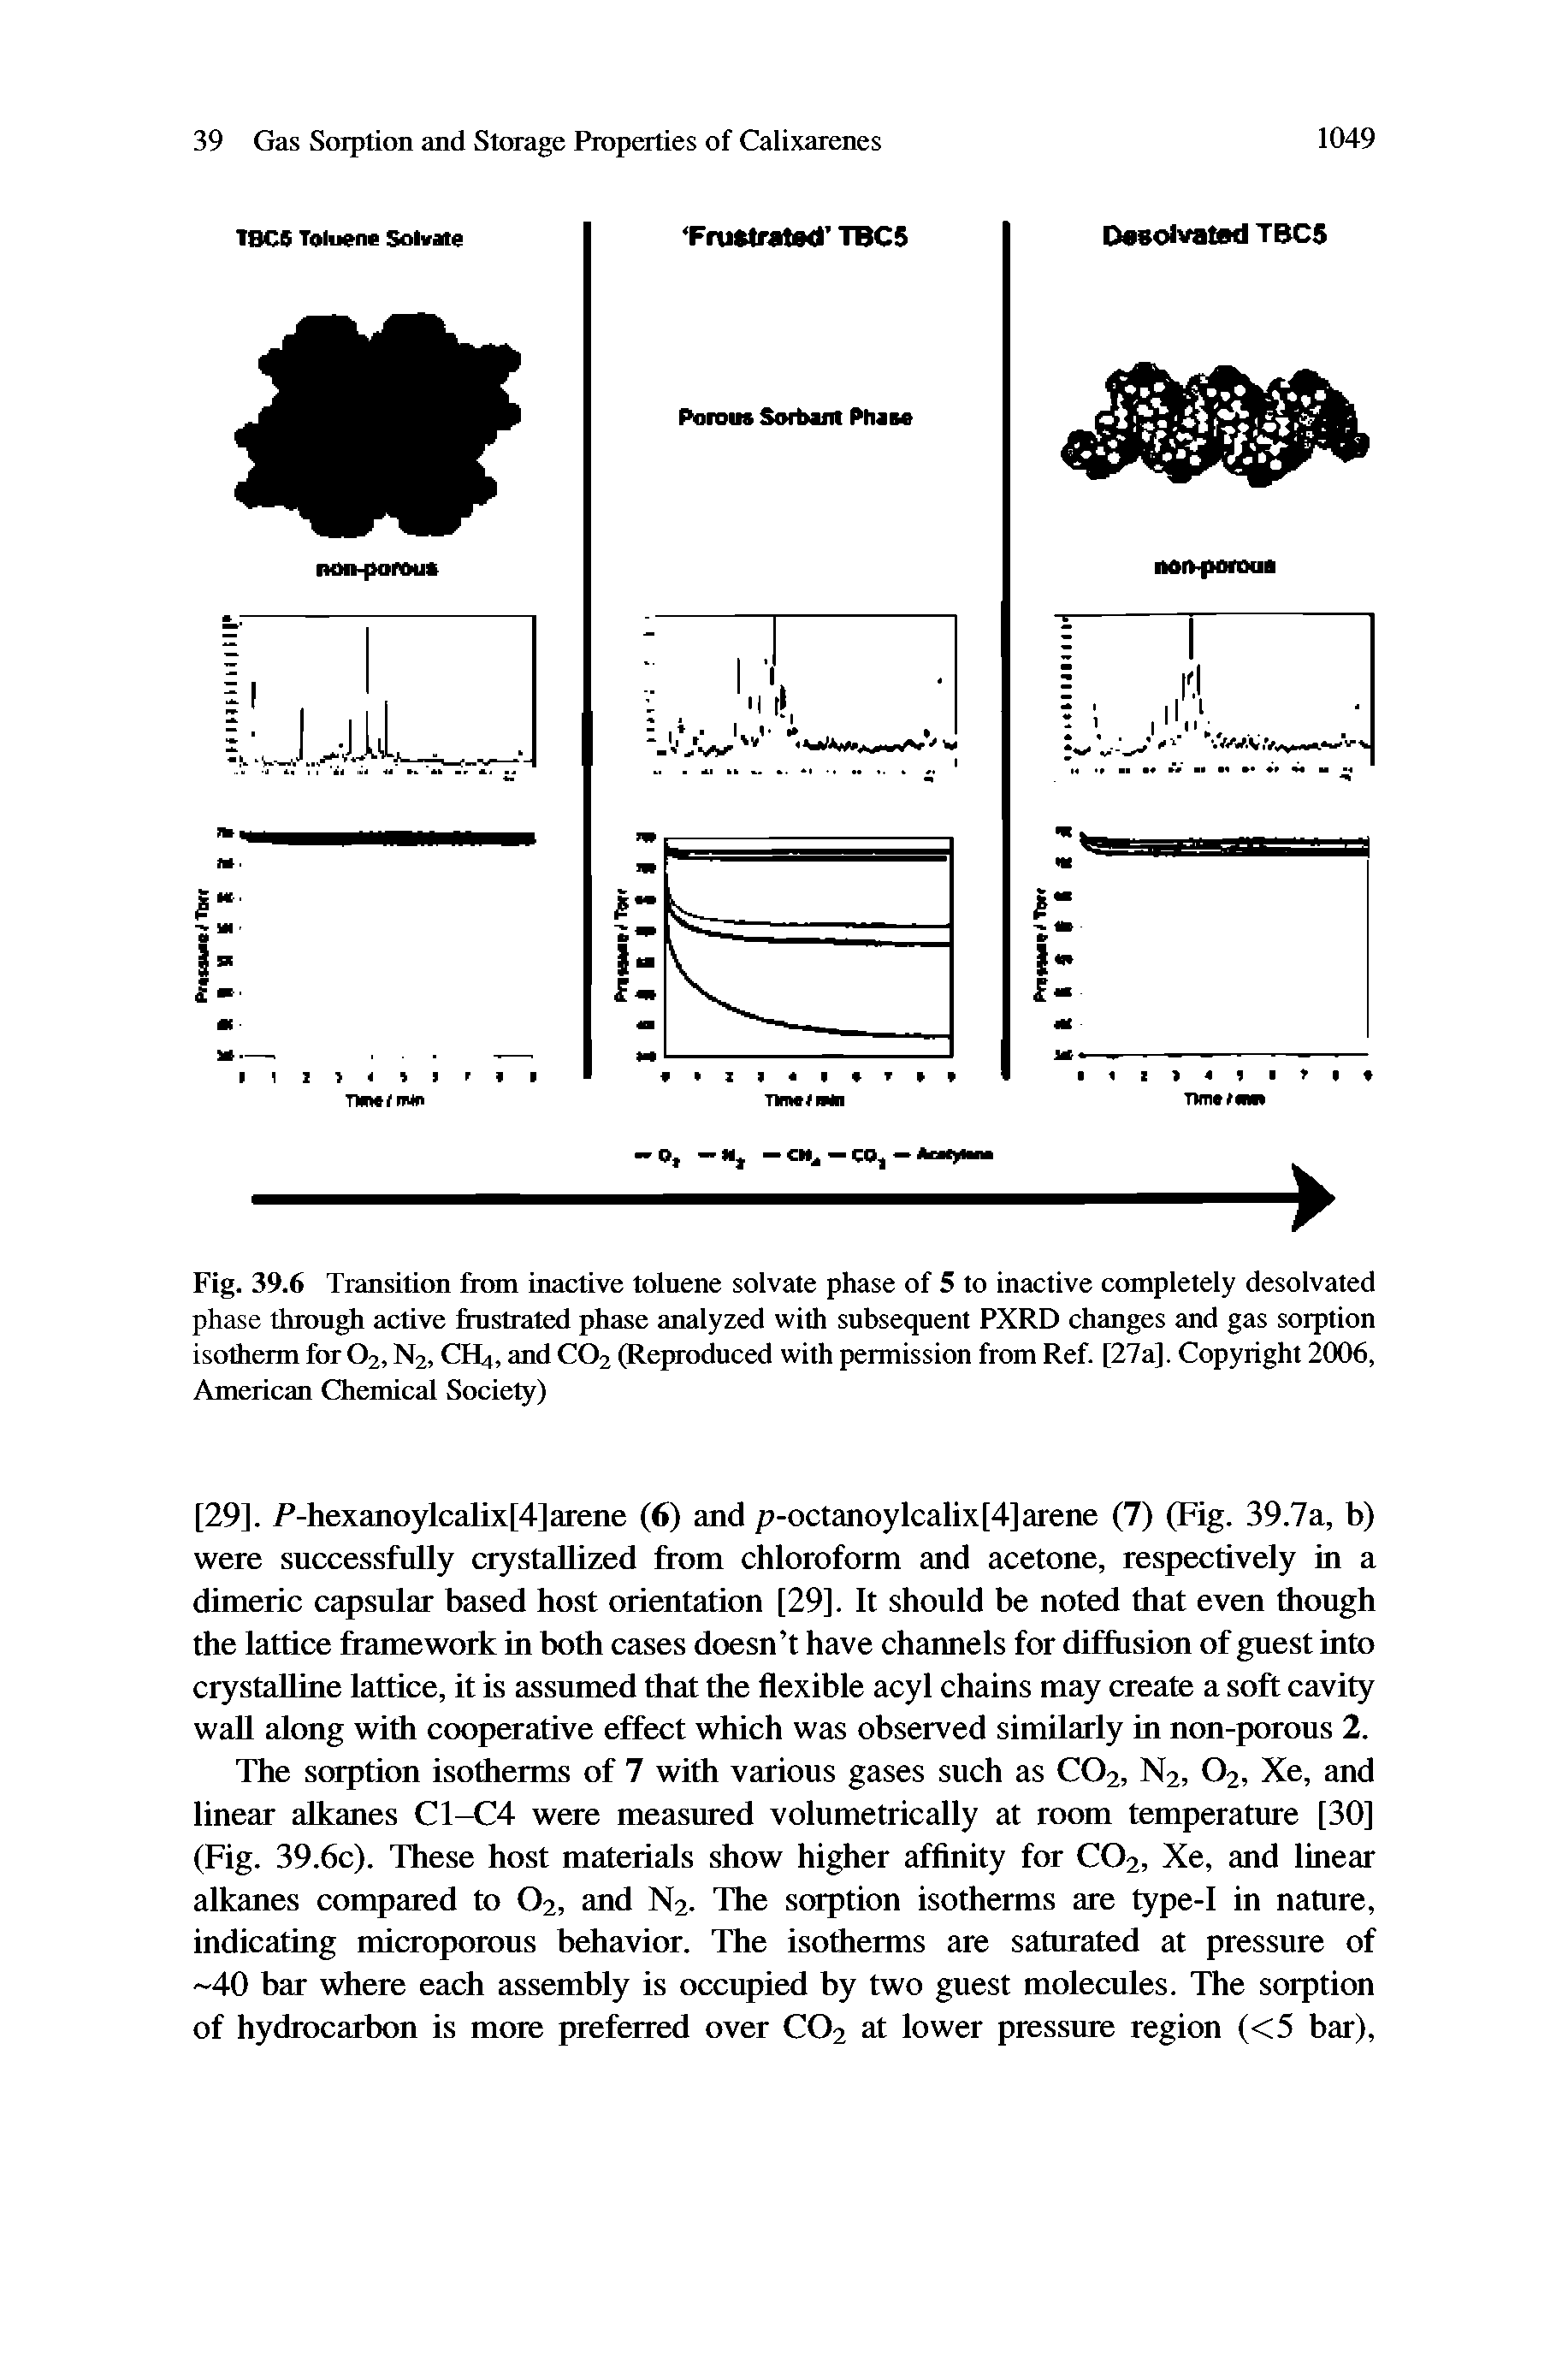 Fig. 39.6 Transition from inactive toluene soivate phase of 5 to inactive compieteiy desoivated phase through active frustrated phase anaiyzed with subsequent PXRD changes and gas sorption isotherm for O2, N2, CH4, and CO2 (Reproduced with permission from Ref. [27a]. Copyright 2006, American Chemical Society)...